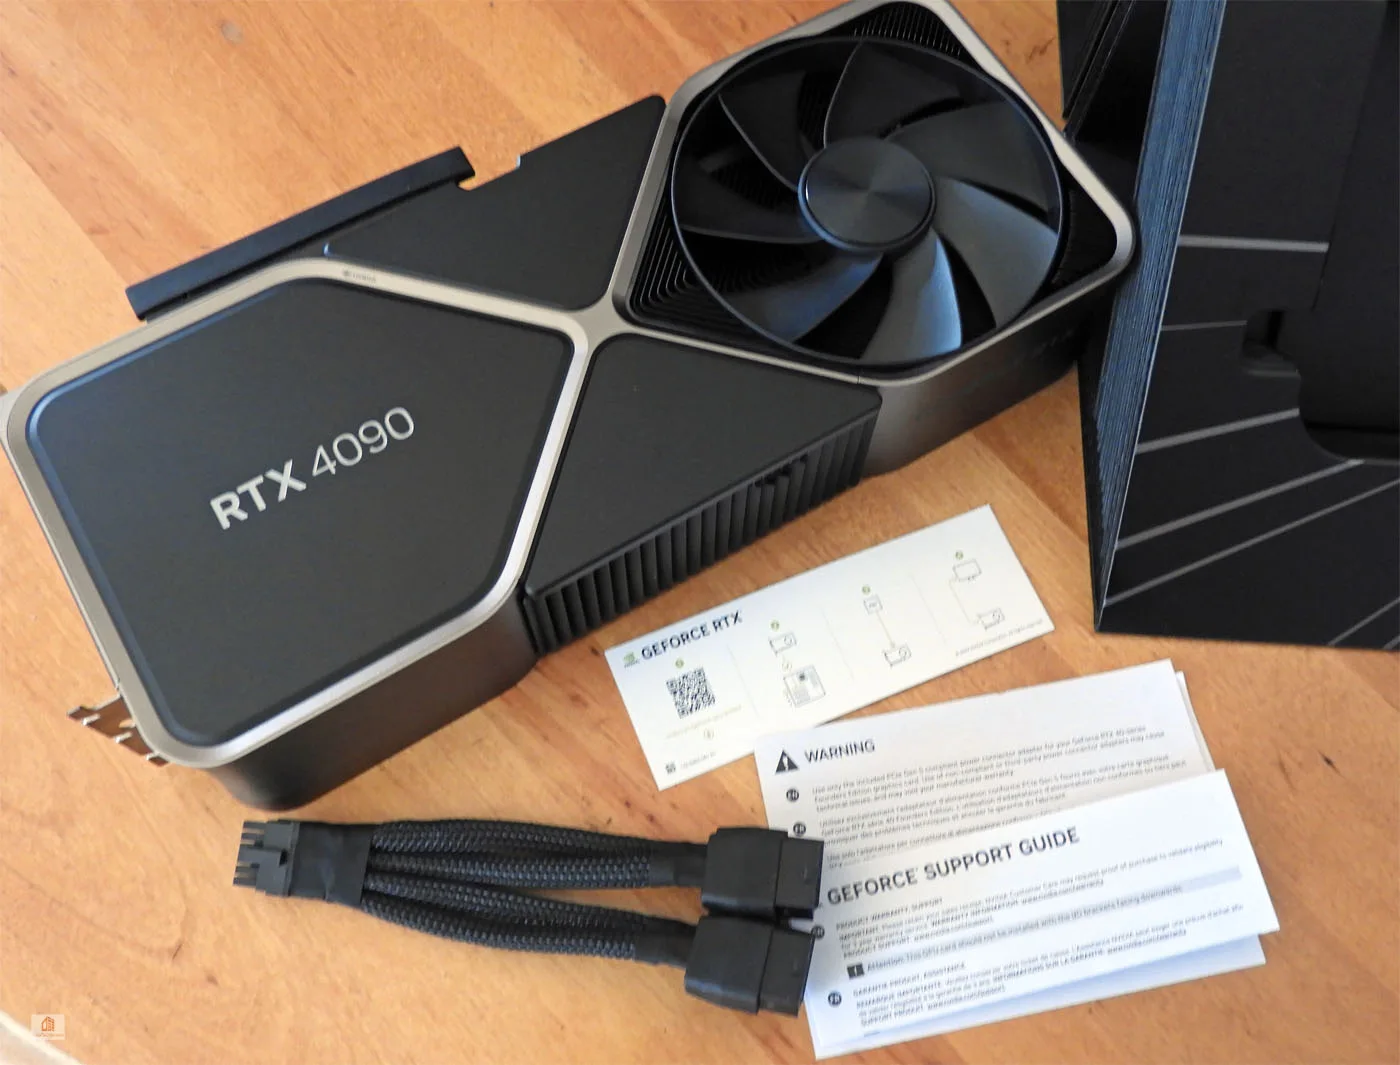 RTX 4090 Performance – 45 Games, VR & Pro Apps Benchmarked –  BabelTechReviews